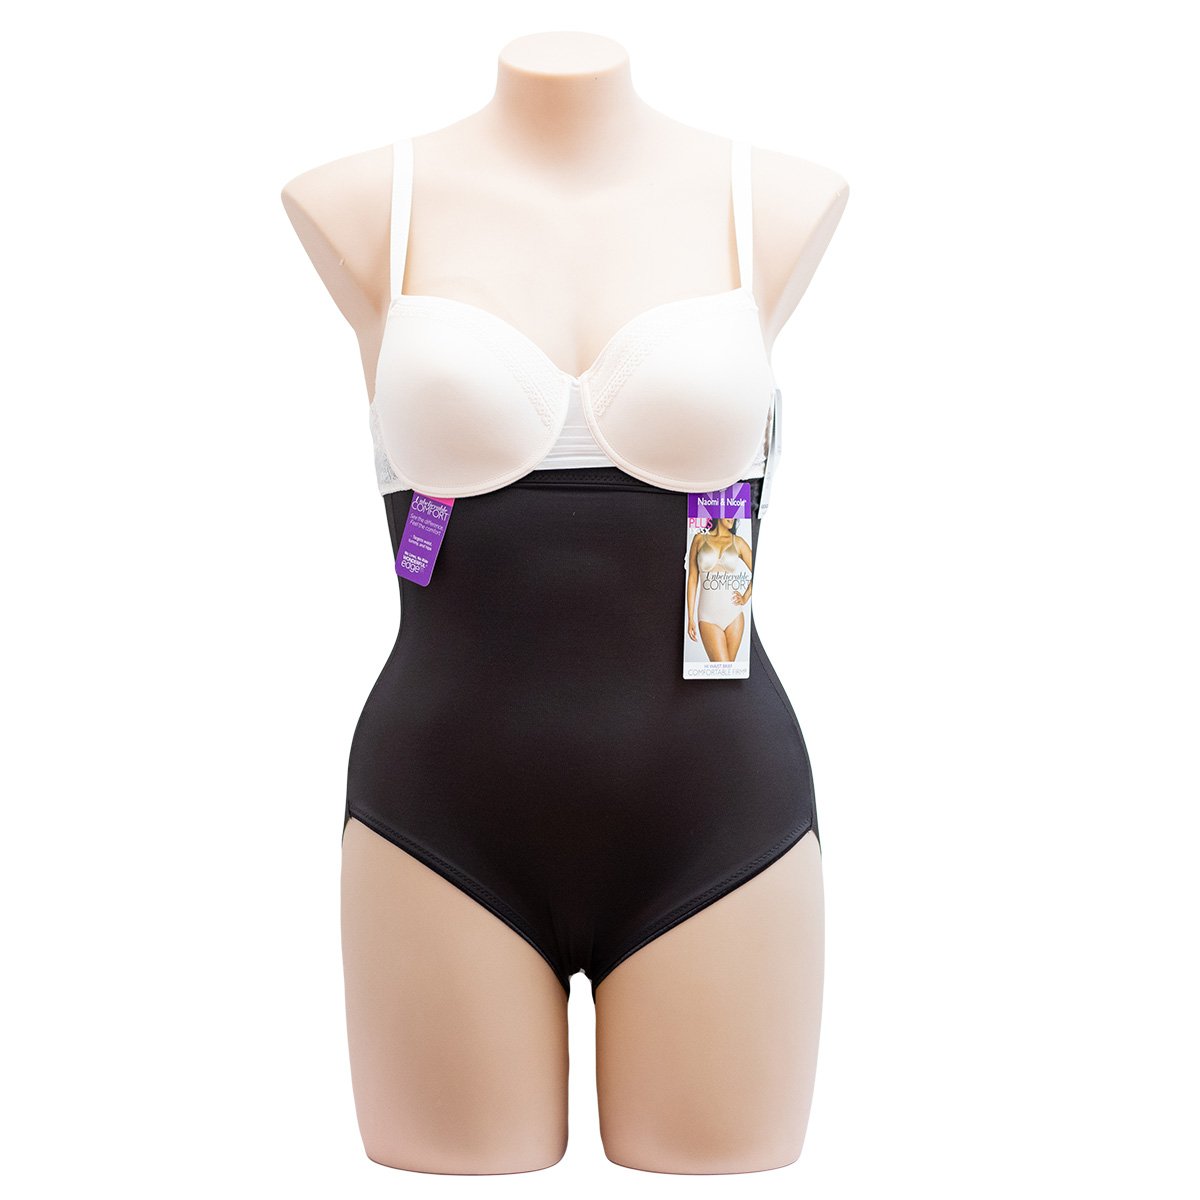 Naomi & Nicole Hi Waist Brief Comfortable Firm 7775 - Shapewear Black / 16 / XL  Available at Illusions Lingerie